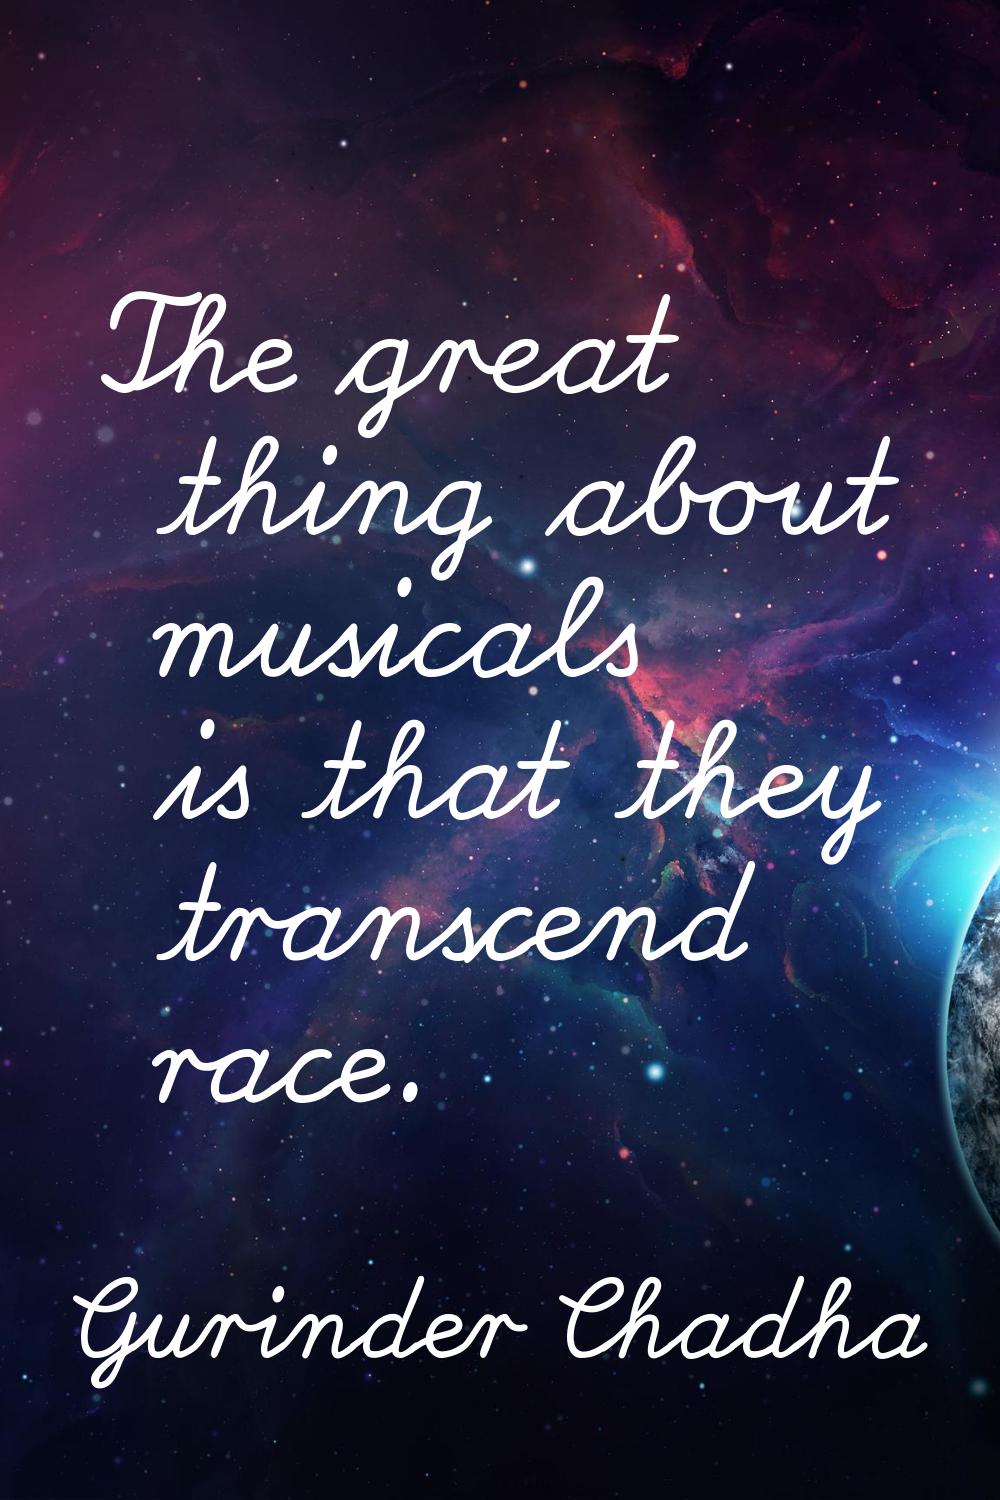 The great thing about musicals is that they transcend race.